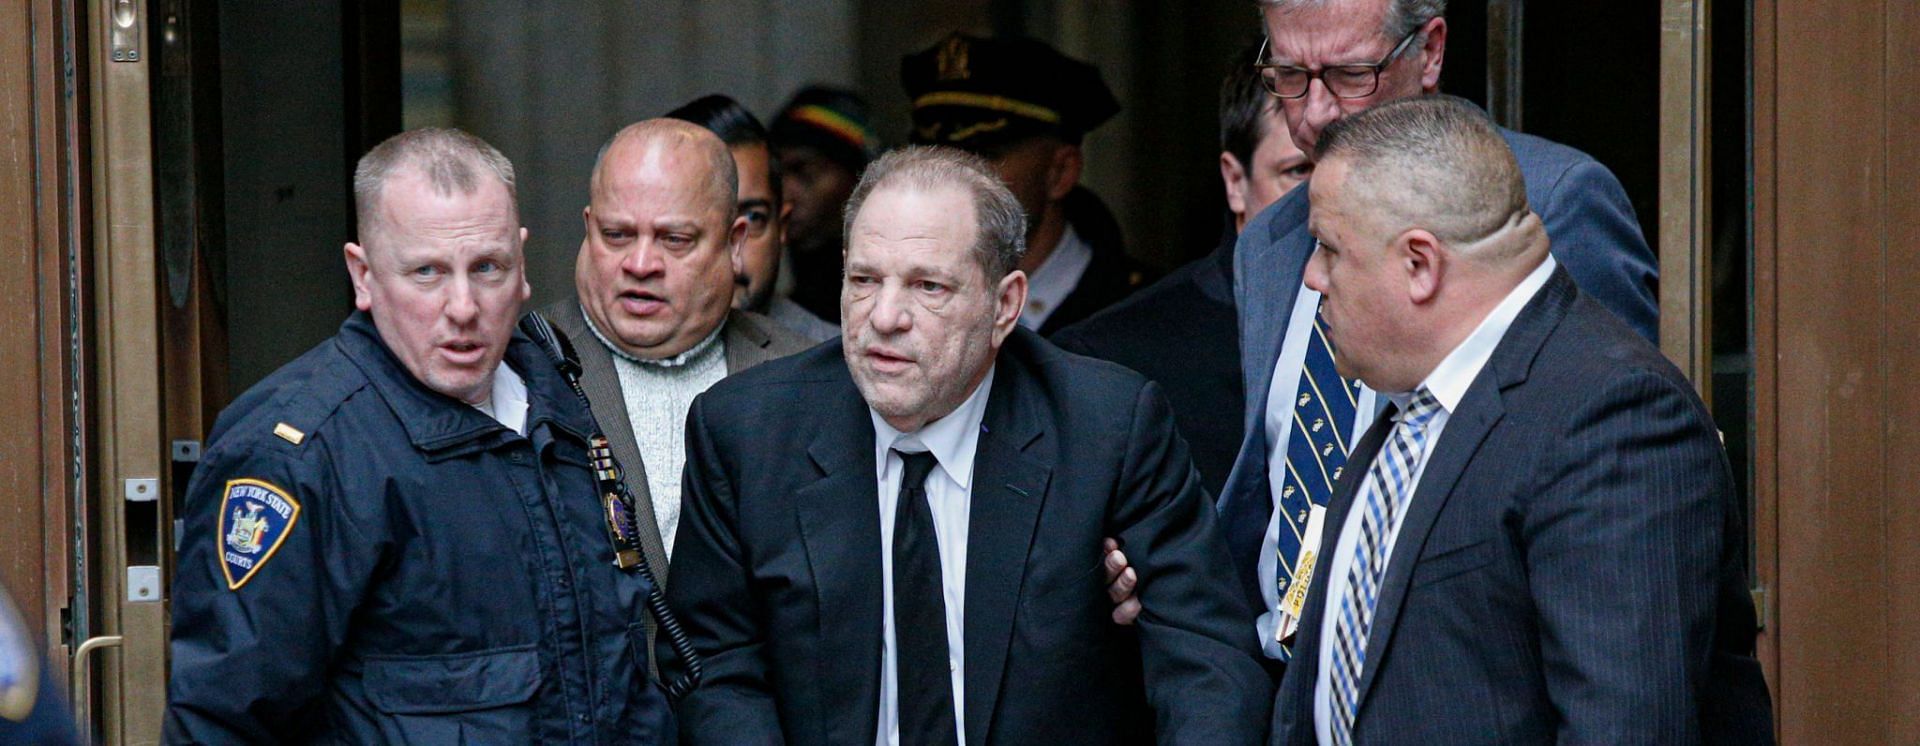 Harvey Weinstein can face up to 24 years in prison for his latest conviction (Image via Getty Images)